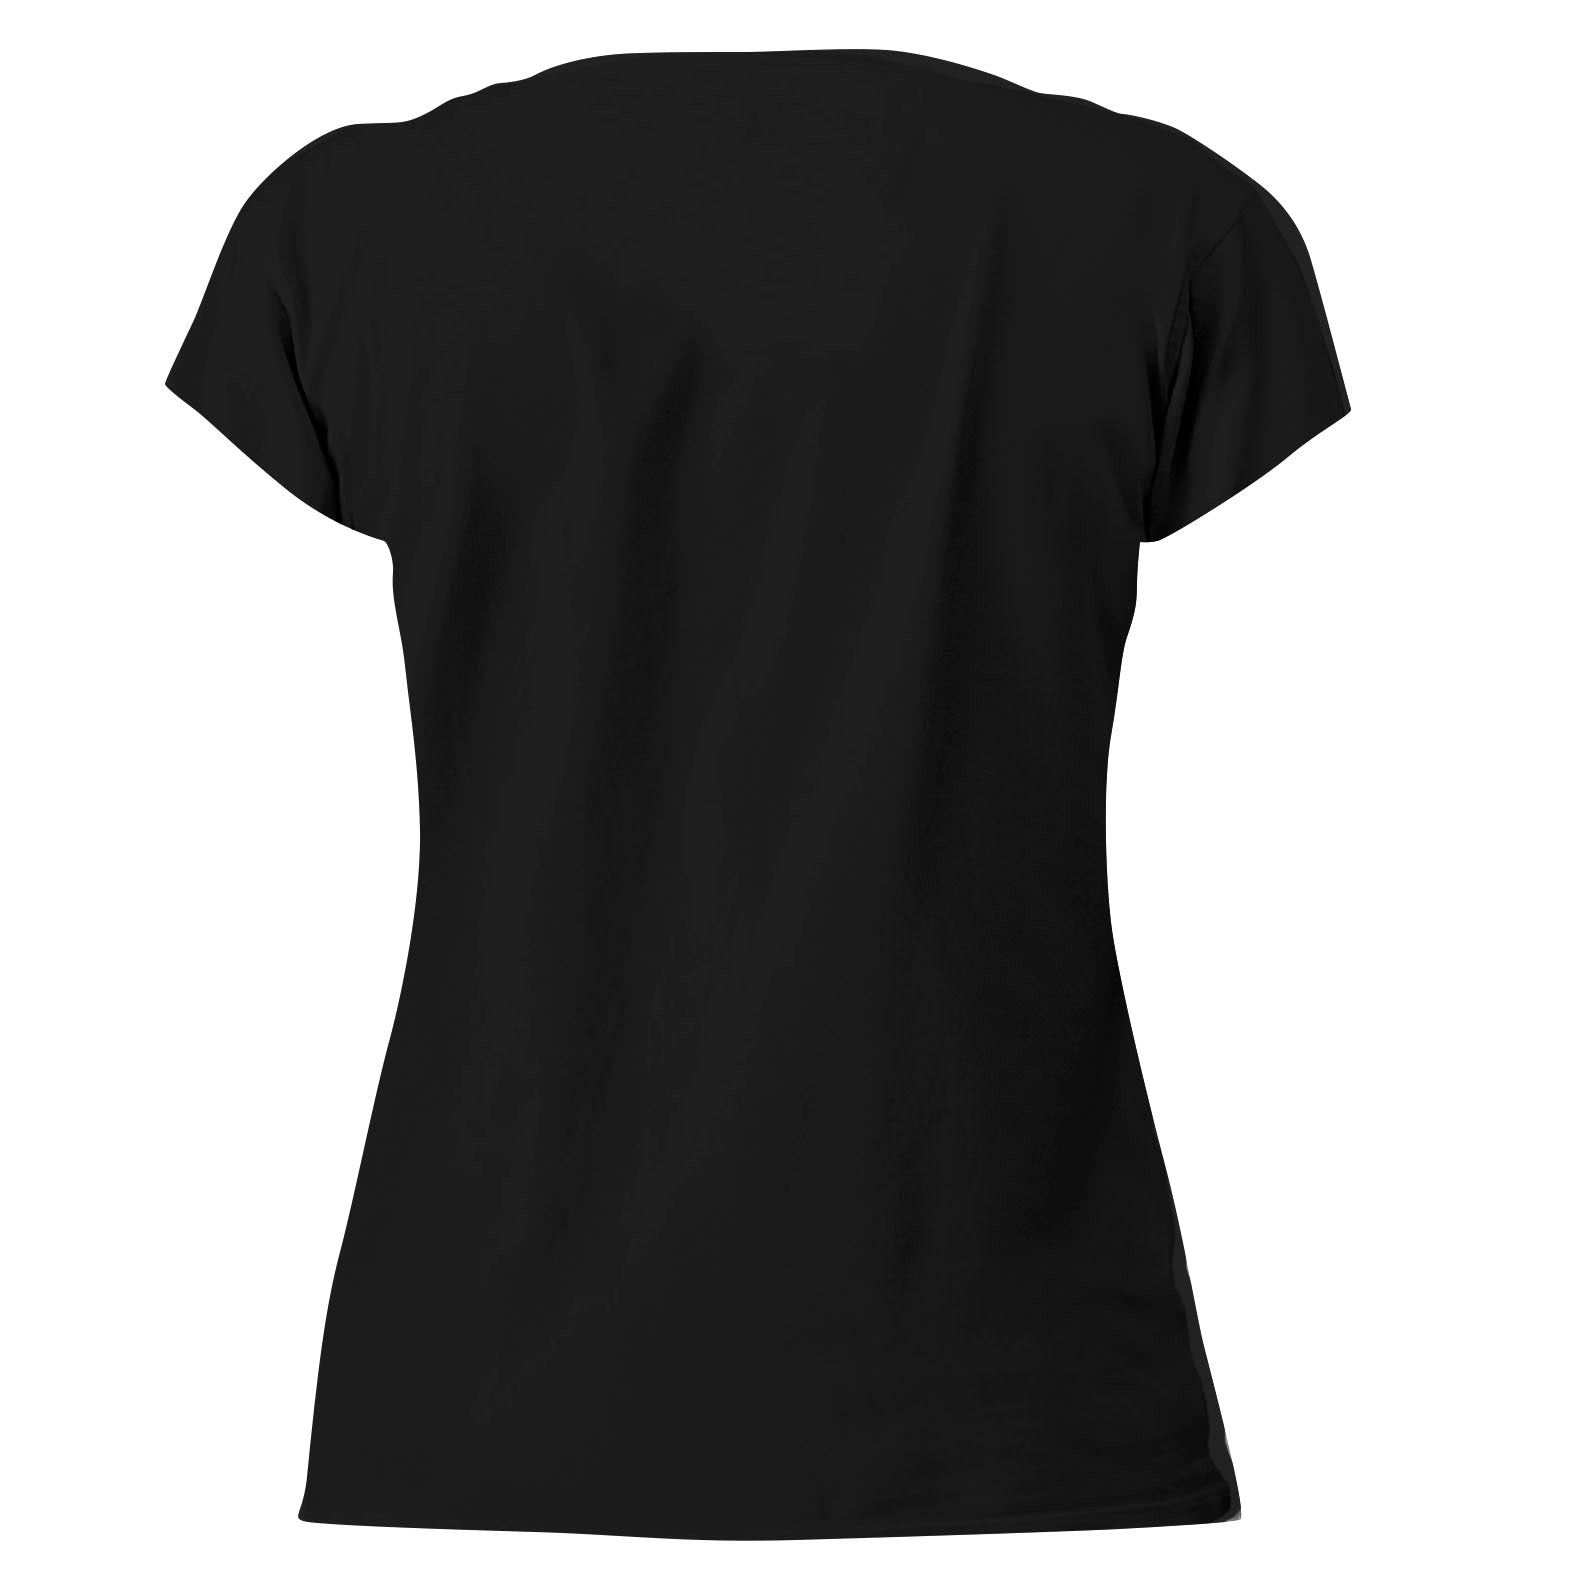 Deb Malcolm Silver Threads Ladies Tshirt- SIZE XXL IS OUT OF STOCK